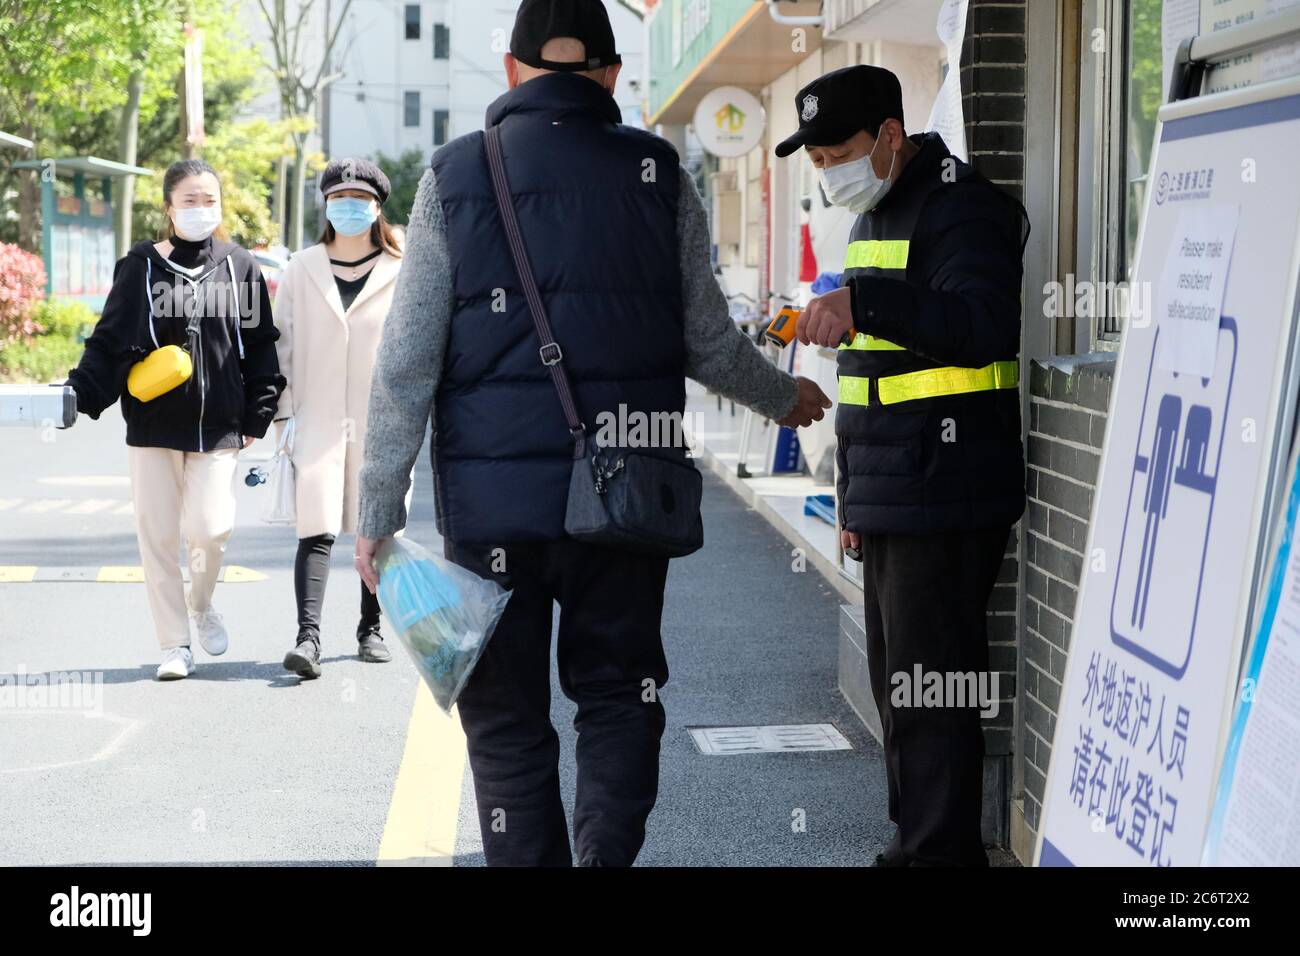 To prevent and control coronavirus, community worker taking temperature of resident at entrance. Stock Photo